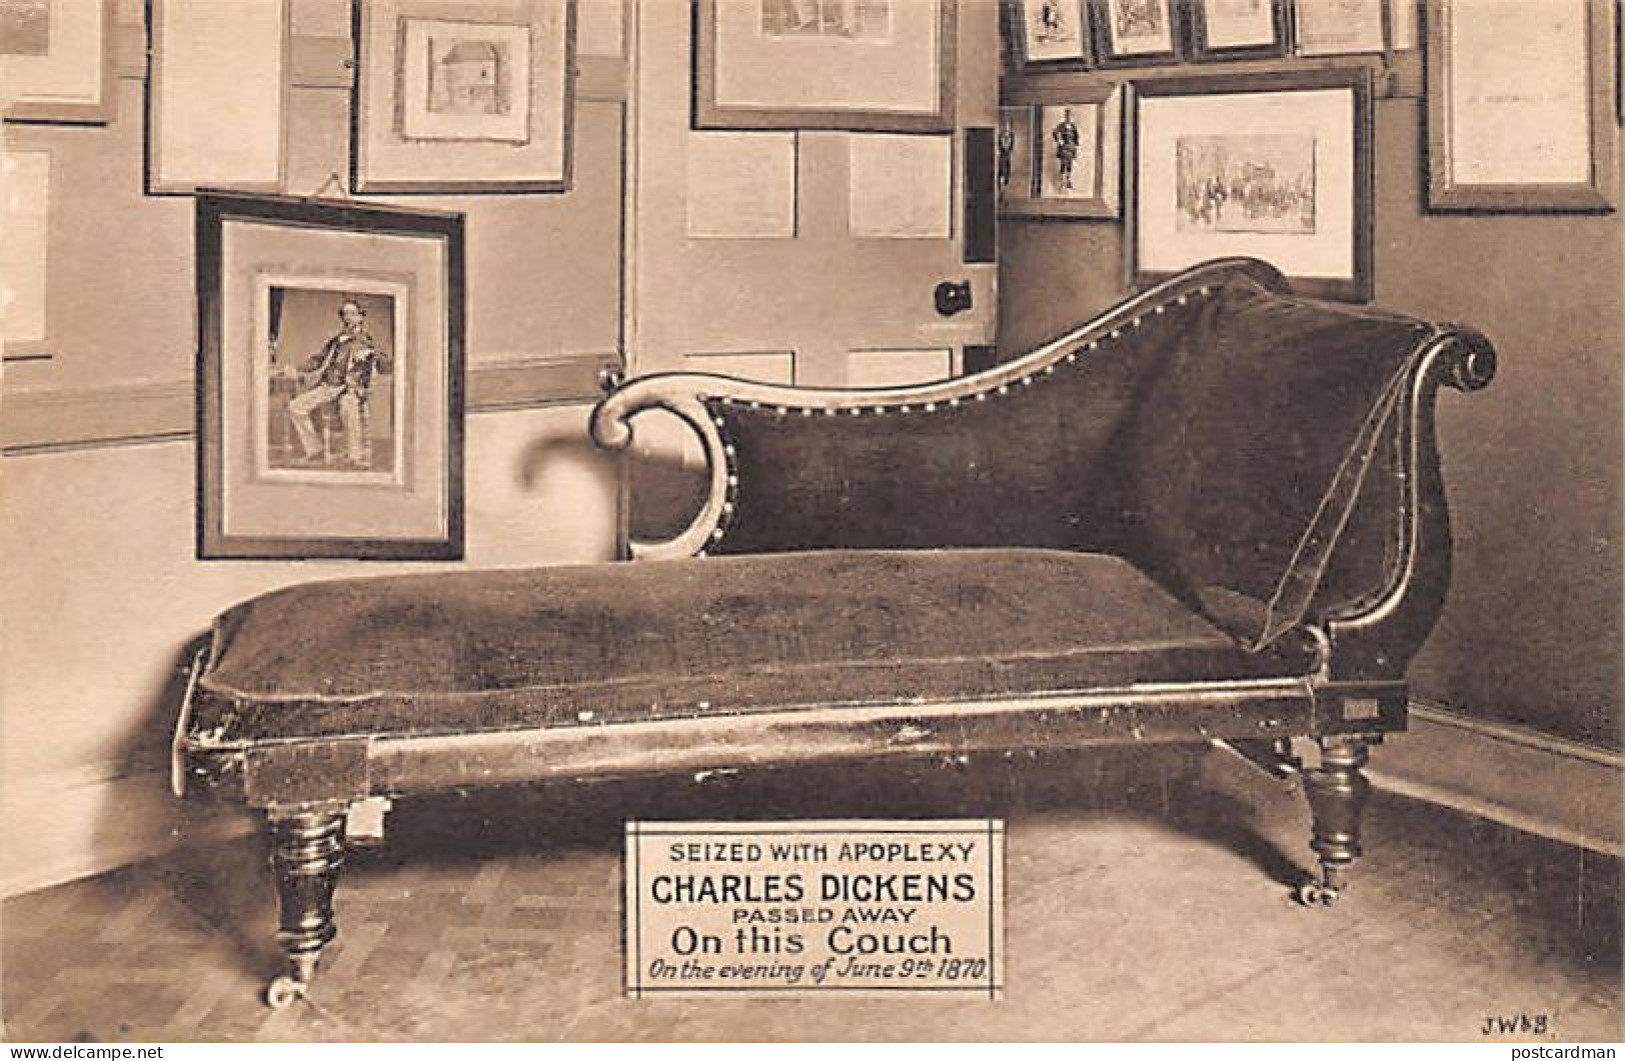 England - Hants - PORTSMOUTH Seized With ApoplexyCharles Dickens Passed Away On This Couch On June 9th 1870 - Portsmouth